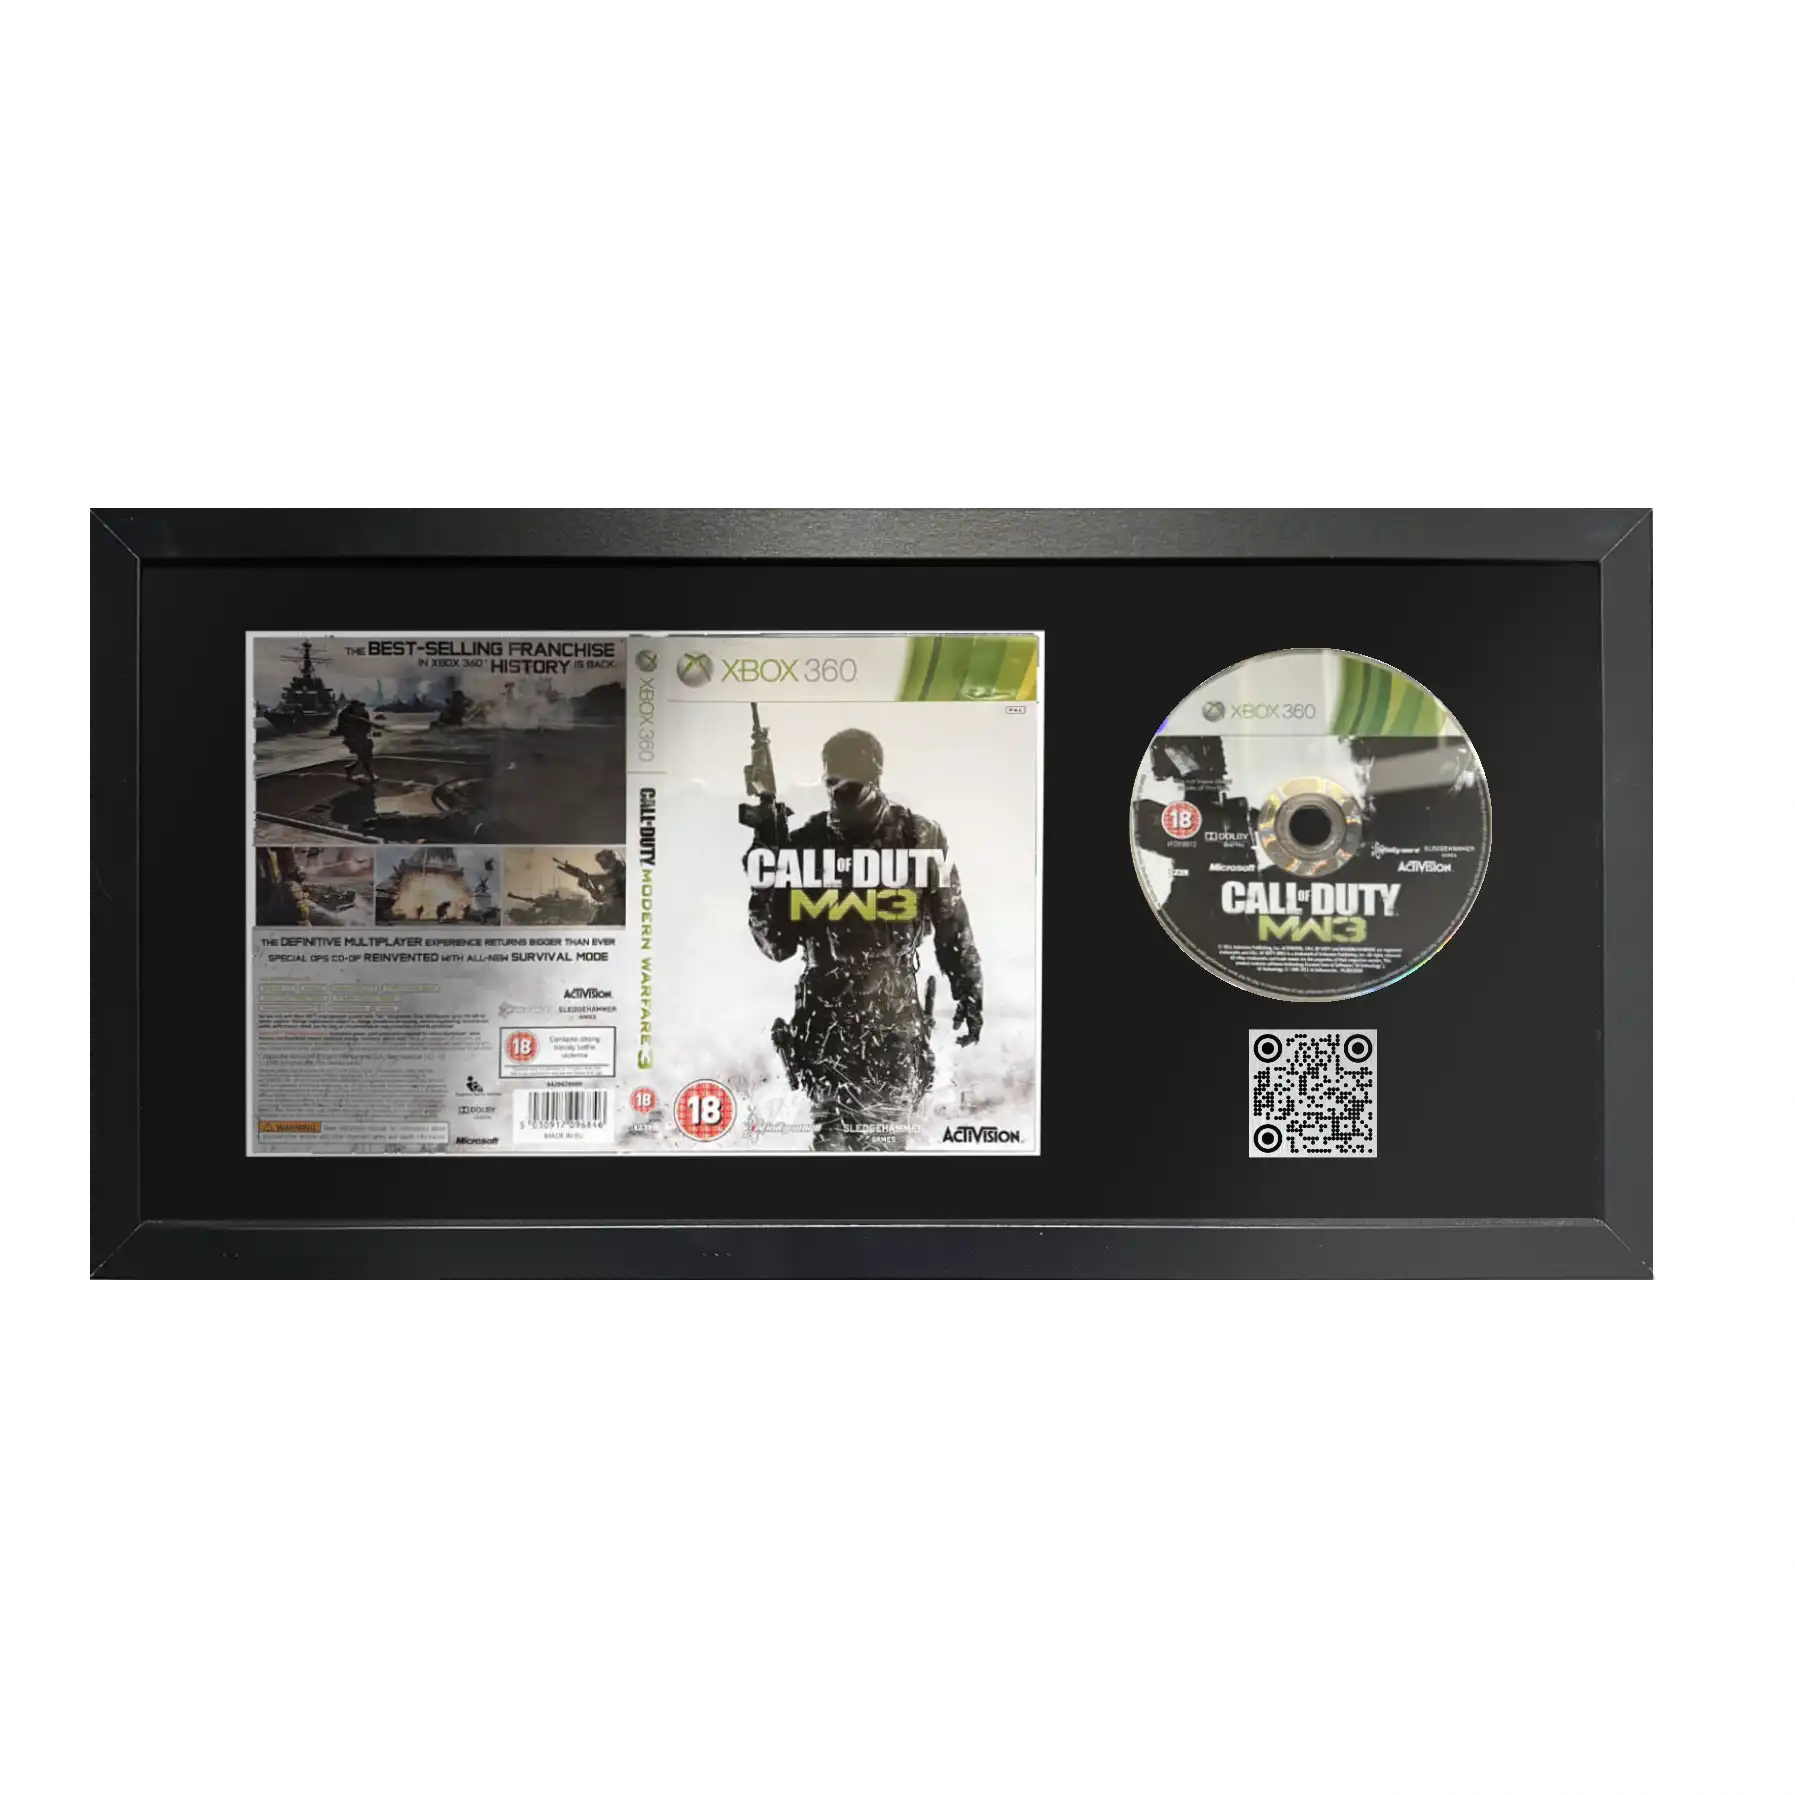 Call of duty modern warfare 3 game on Xbox One in a frame with a QR code